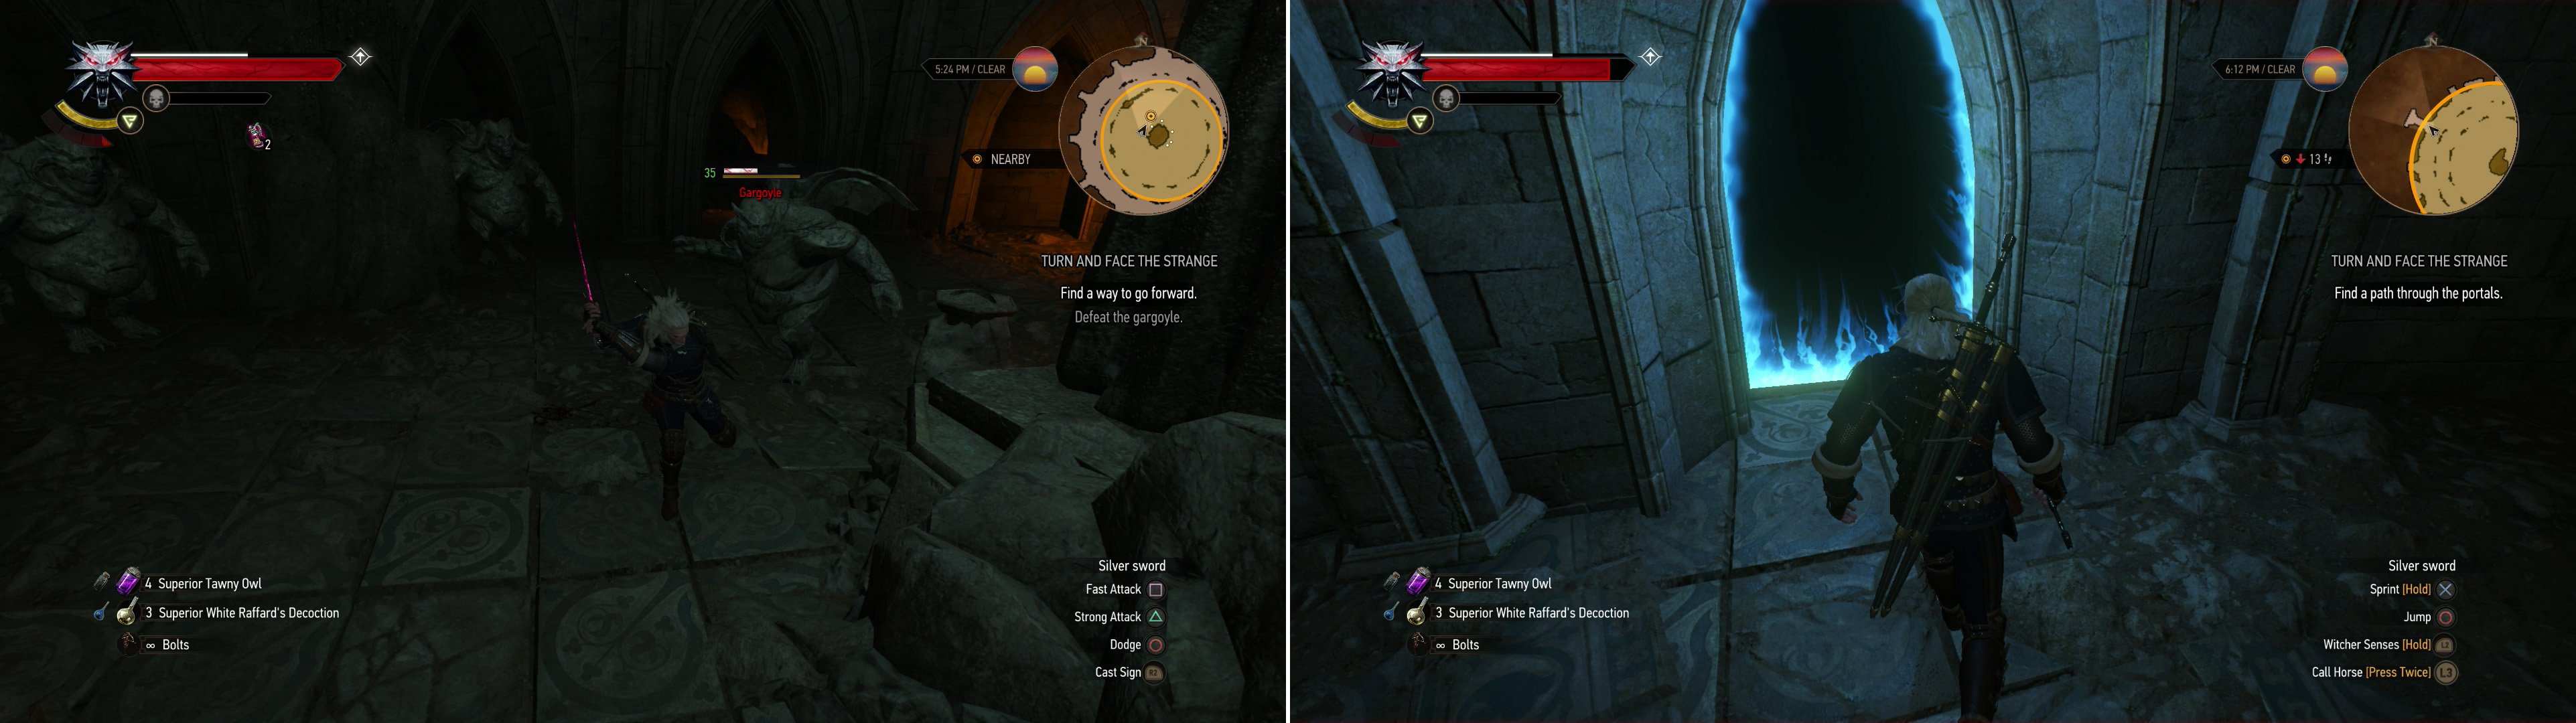 Defeat a Gargoyle (left) and claim its paw, then navigate the portals by entering them in the correct order (right).